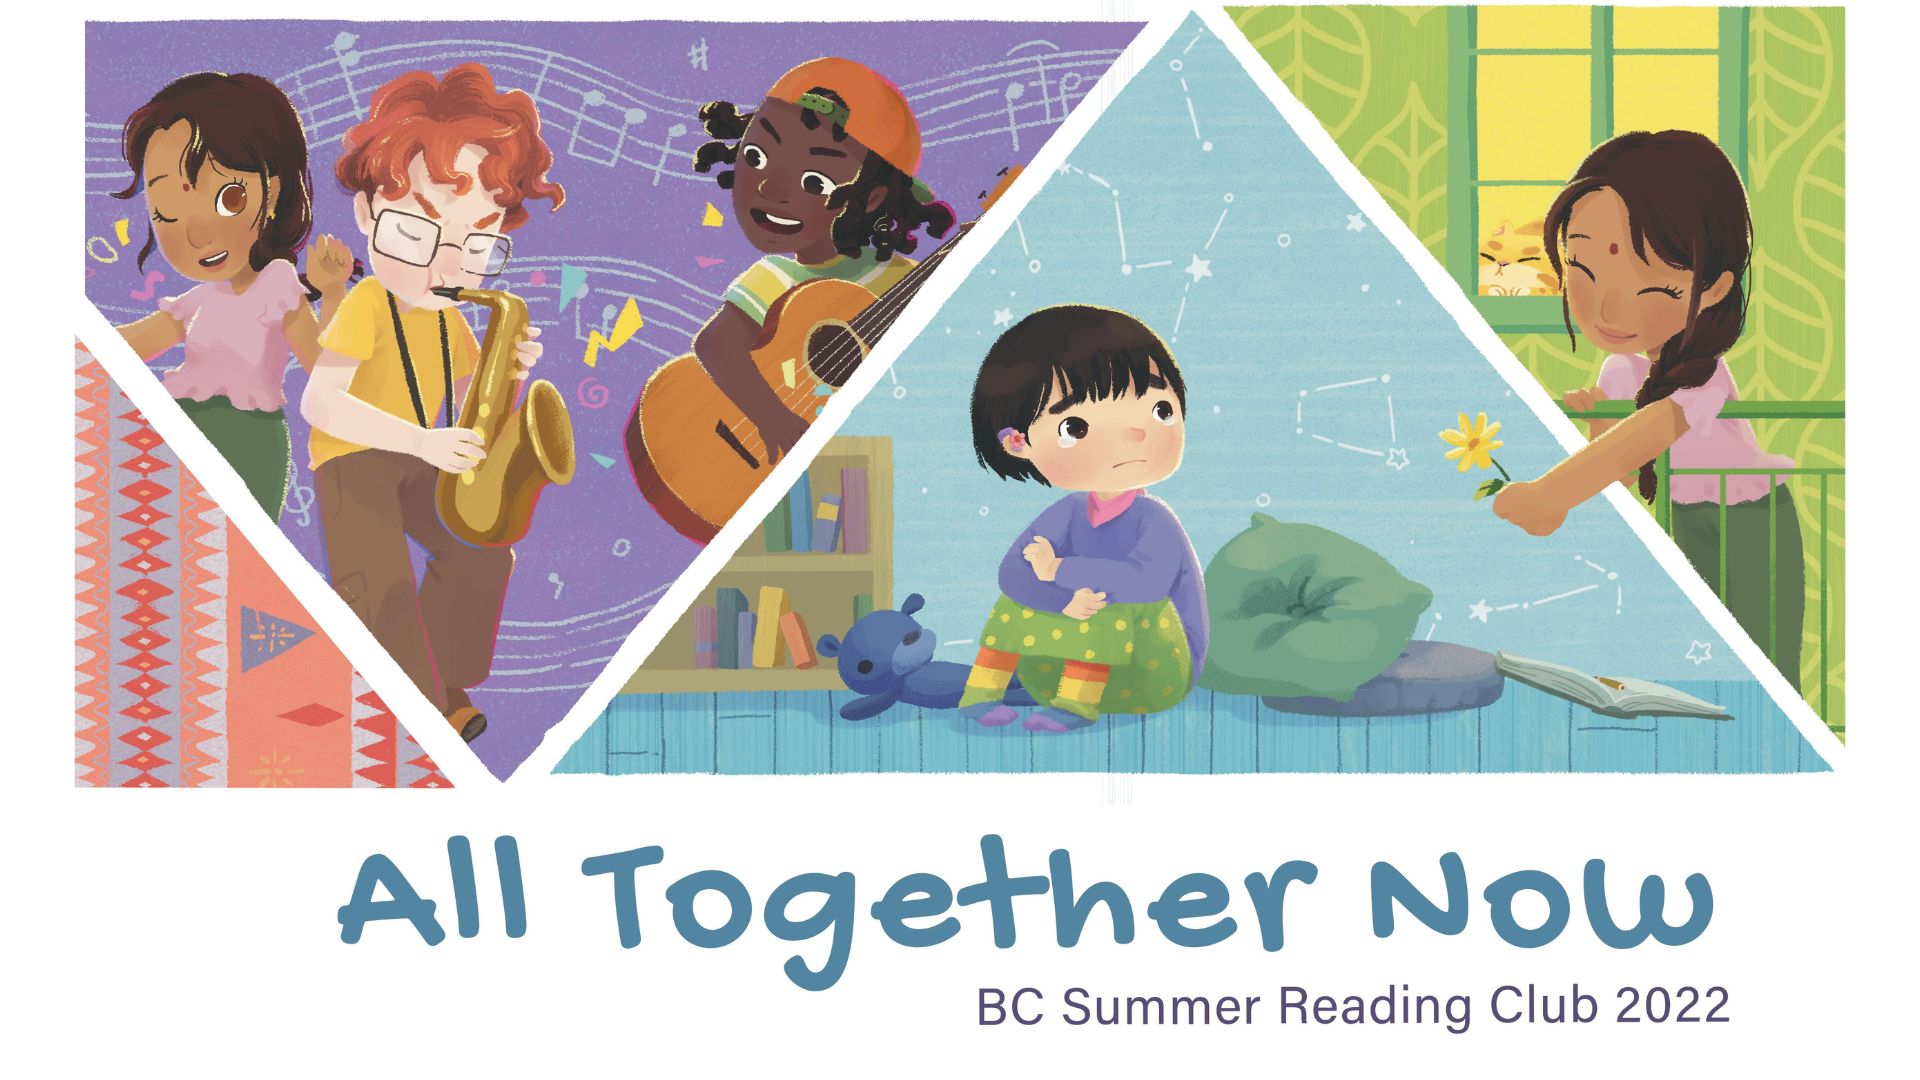 An illustrated image with text on the bottom reading "All Together Now. BC Summer Reading Club 2022." The illustration is composed of patterned triangles making up backgrounds. In one triangle, three children are playing instruments together. In another, a girl offers a flower to a child who is sitting in the third triangle.